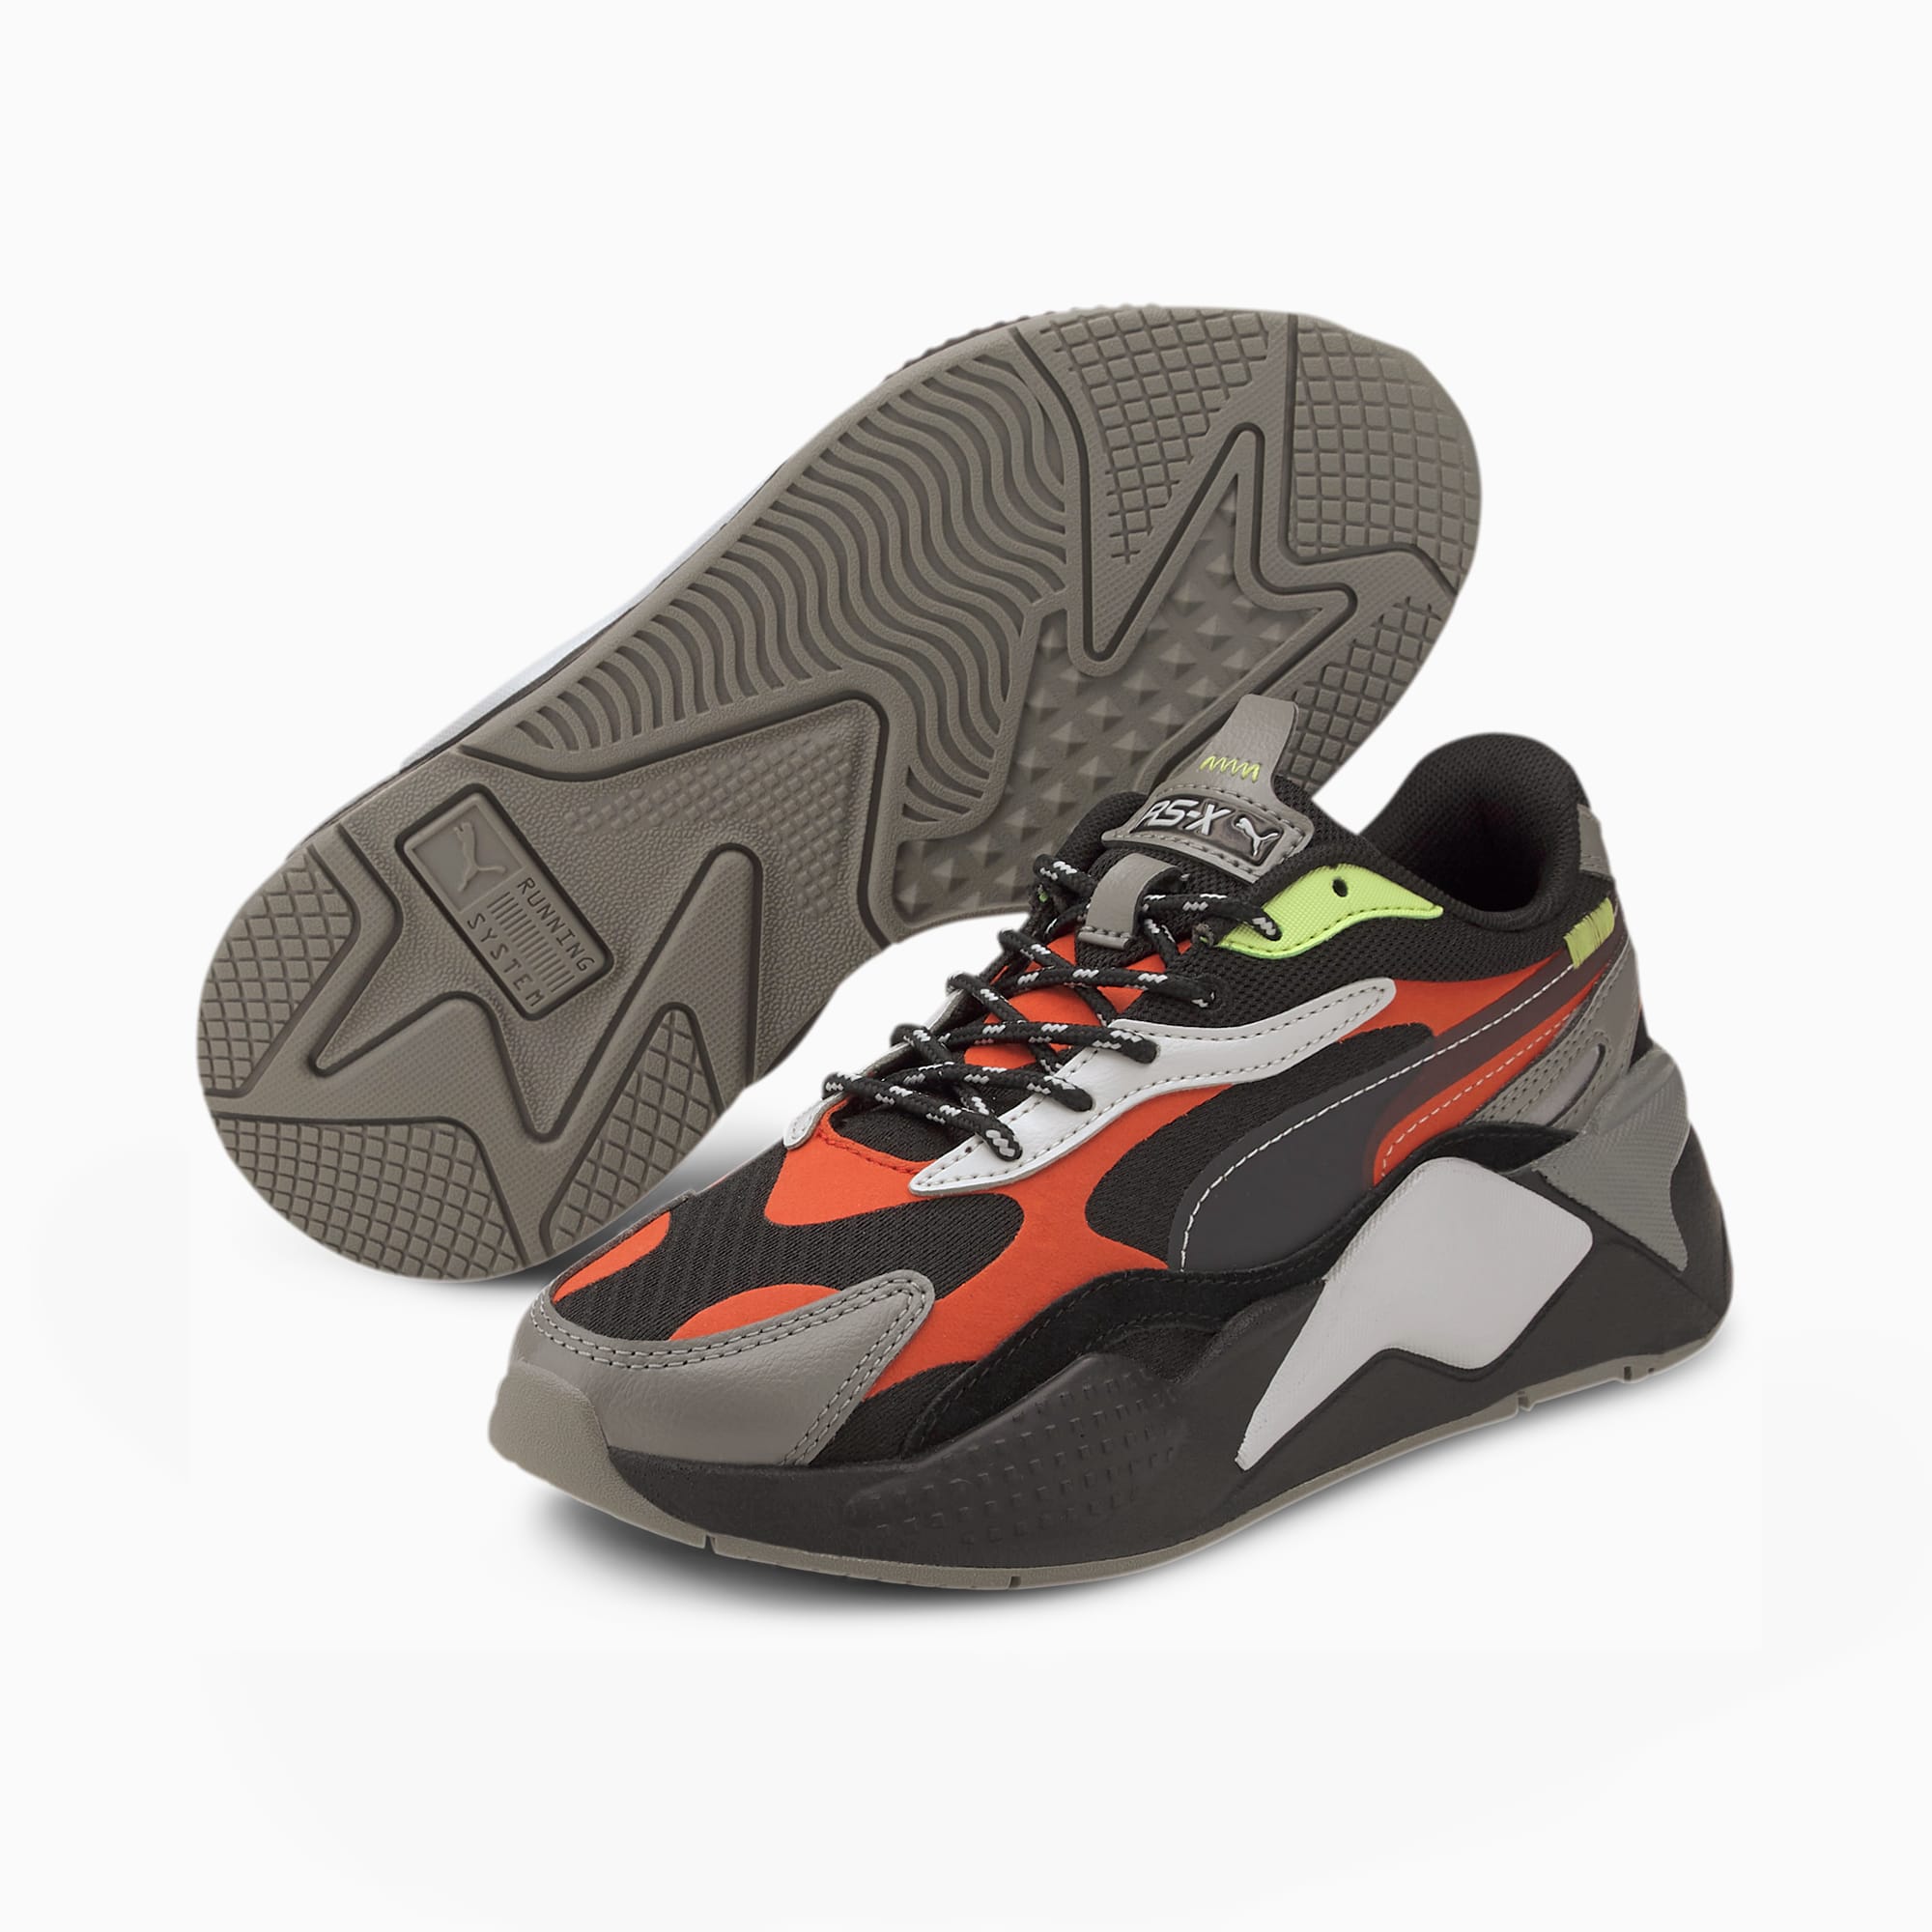 Basket RS-X3 City Attack PS (4801951825983)